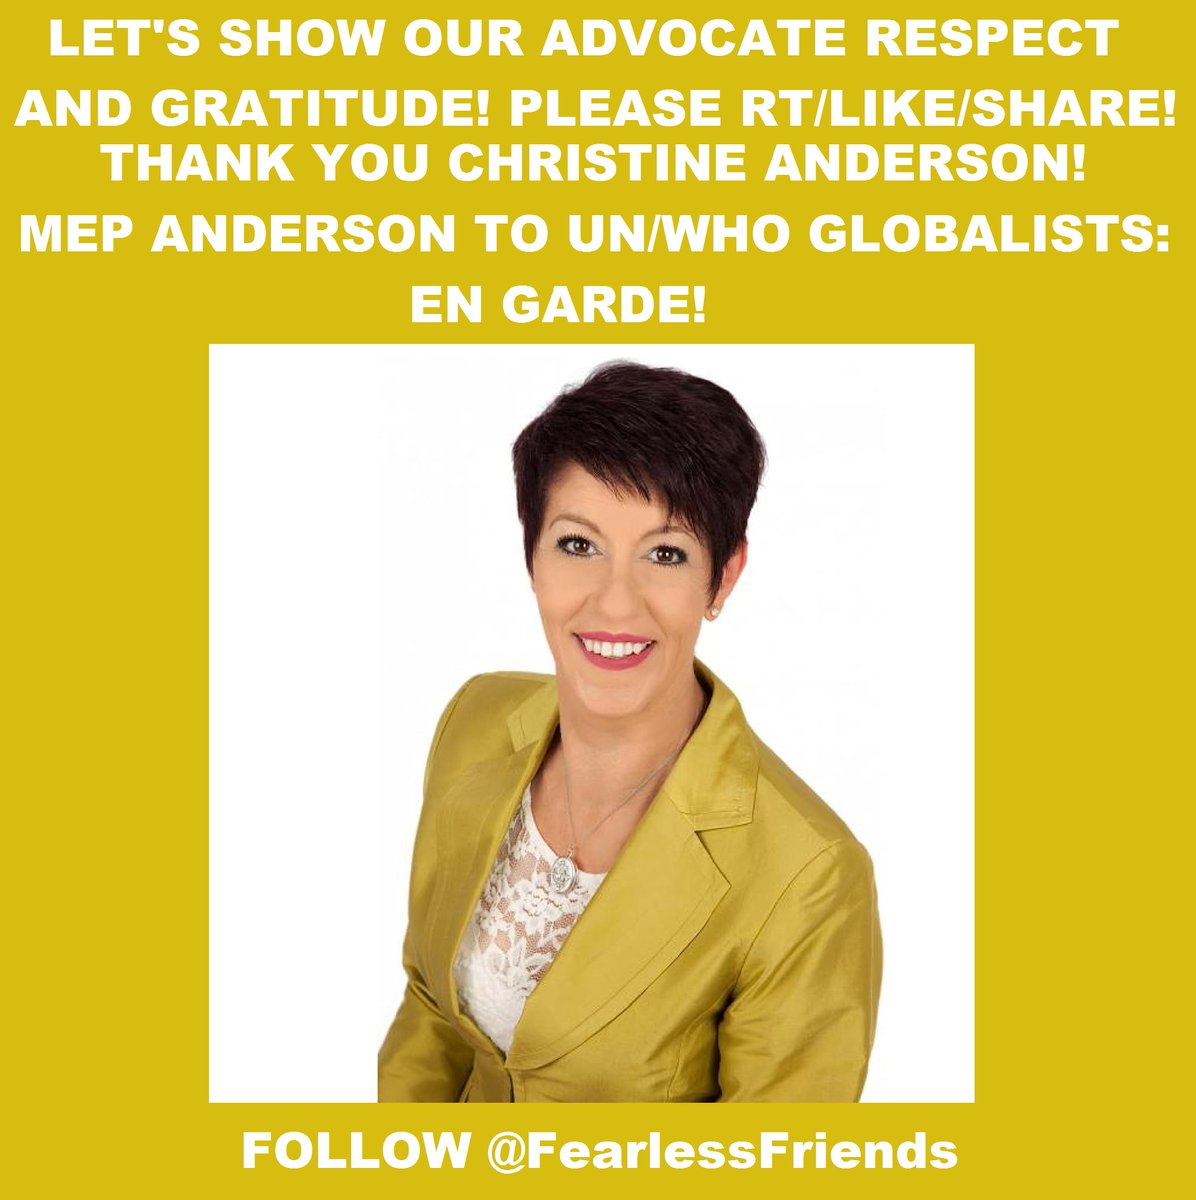 ⚔️ONE OF THE FEW POLS FIGHTING FOR US⚔️!👇

Let's show #ChristineAnderson @AndersonAfDMdEP our admiration♥️respect and gratitude!🙏👇

EVERYONE LIKE✅ RETWEET ✅ & FOLLOW HER!👇